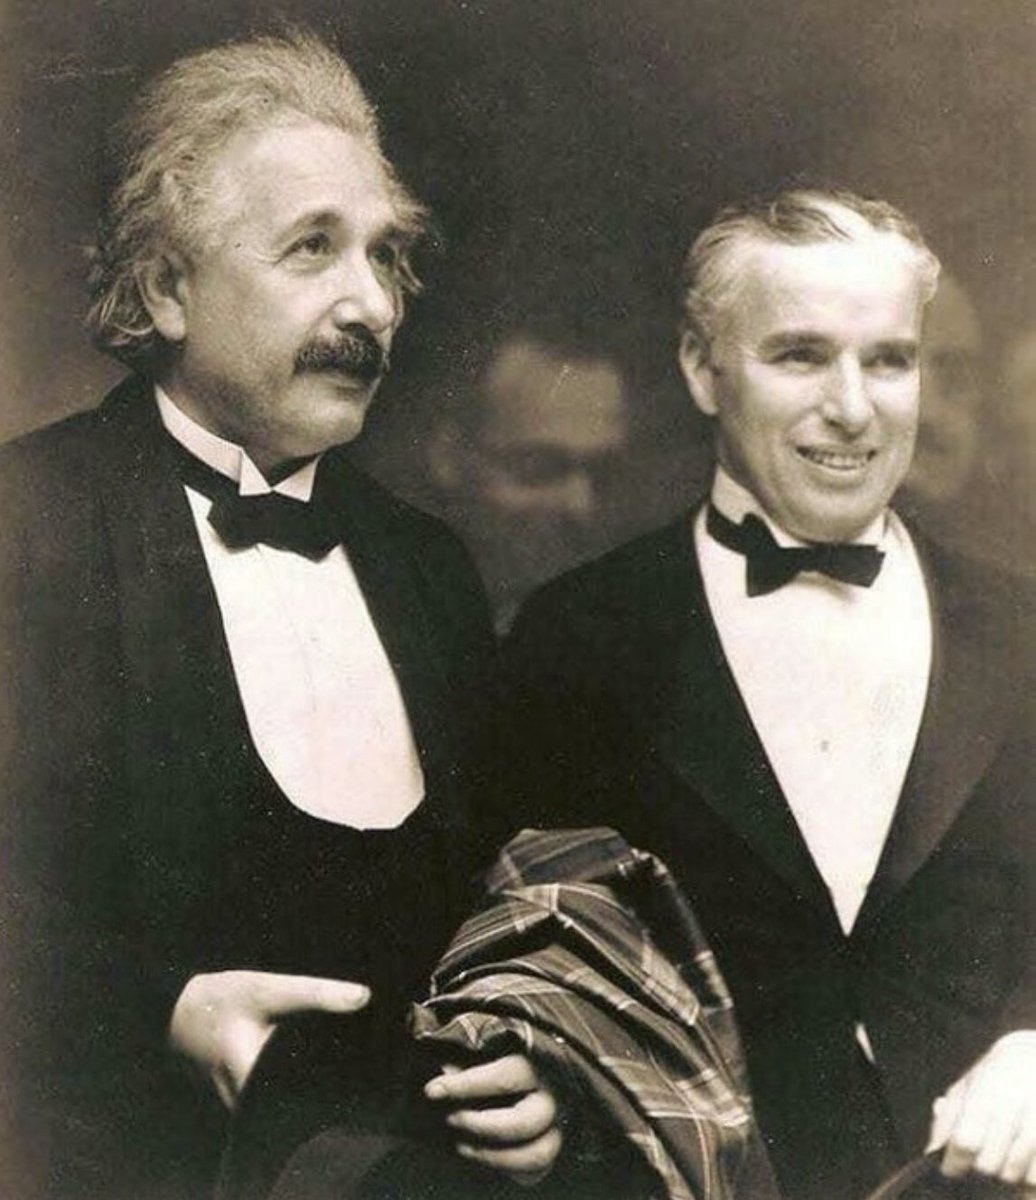 When Albert Einstein met Charlie Chaplin in 1931, Einstein said, 'What I admire most about your art is its universality. You do not say a word, and yet the world understands you.' 'It's true.' Replied Chaplin, 'But your fame is even greater. The world admires you, when no one…